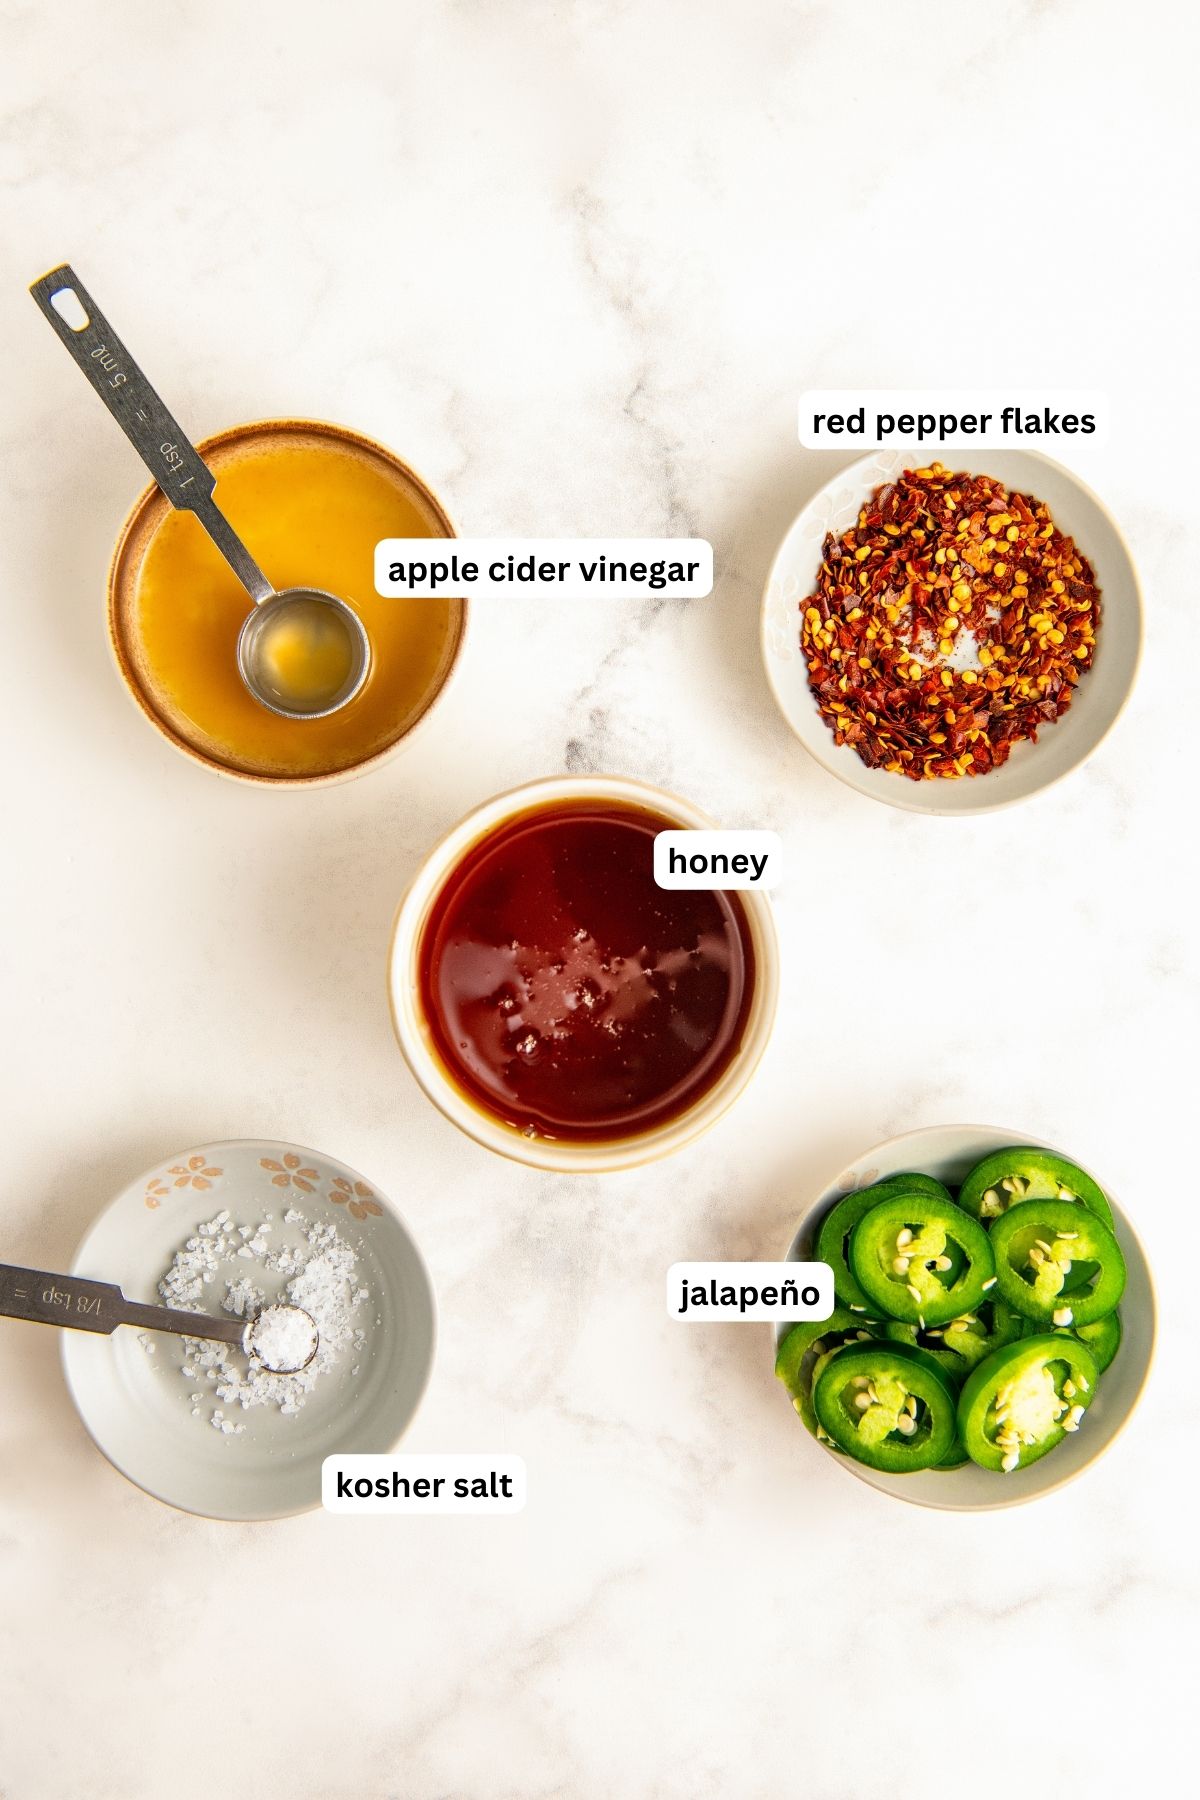 Ingredients for hot honey recipe arranged in jars. From top to bottom: apple cider vinegar, crushed red pepper flakes, honey, salt and fresh jalapeños.